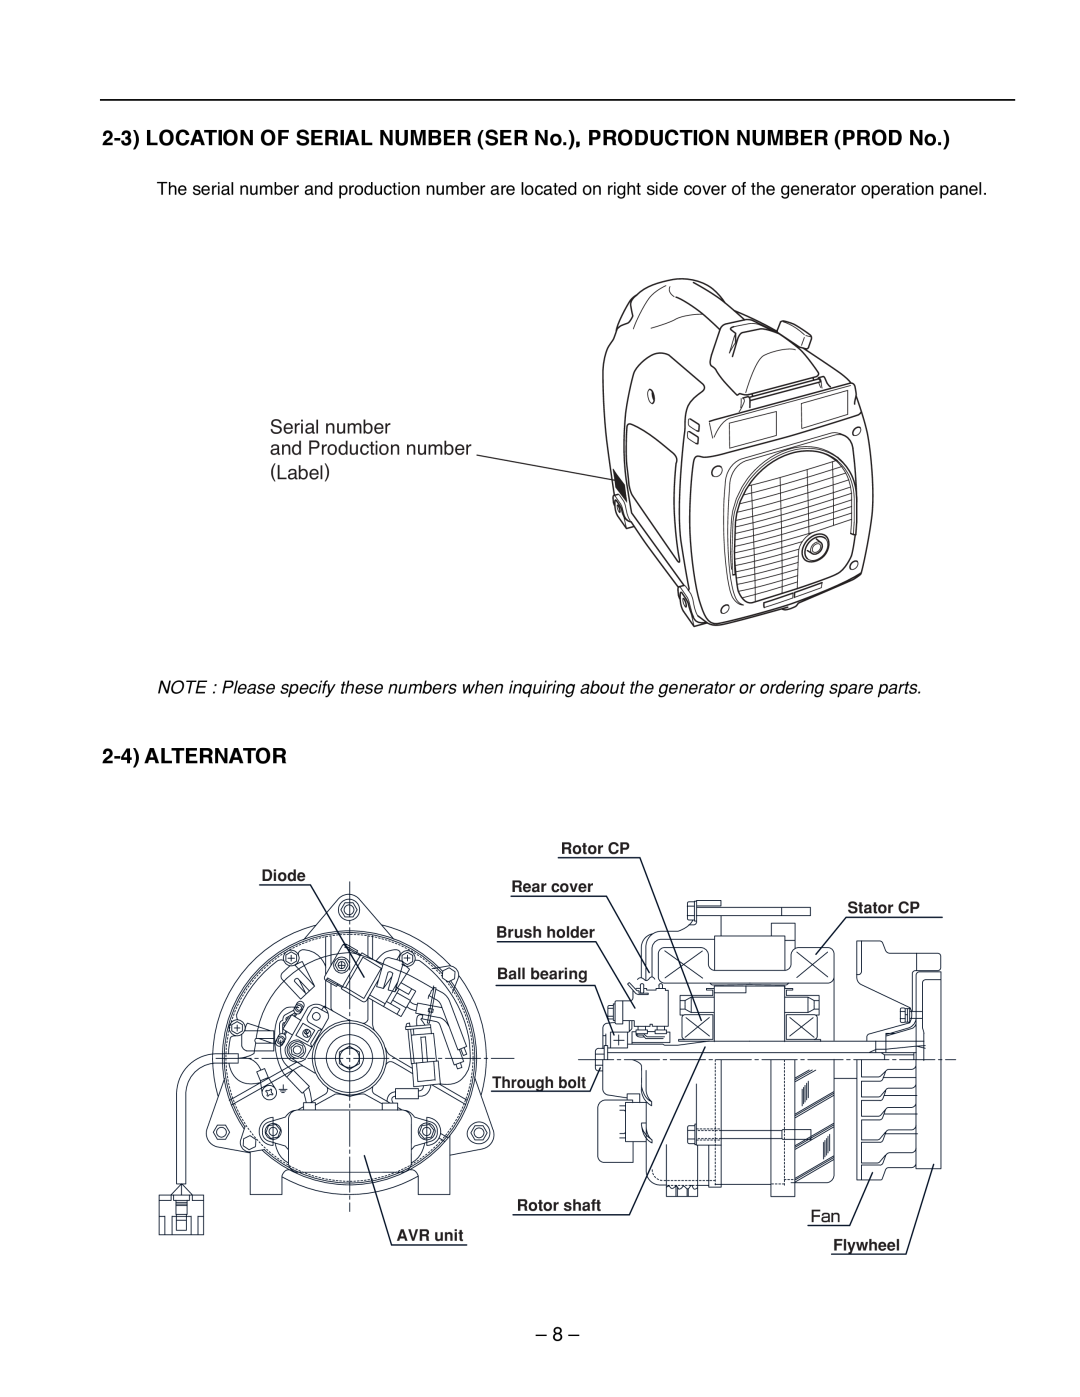 Subaru R1100 LOCATION OF SERIAL NUMBER SER No., PRODUCTION NUMBER PROD No, Alternator, Rotor CP, Diode, Rear cover 